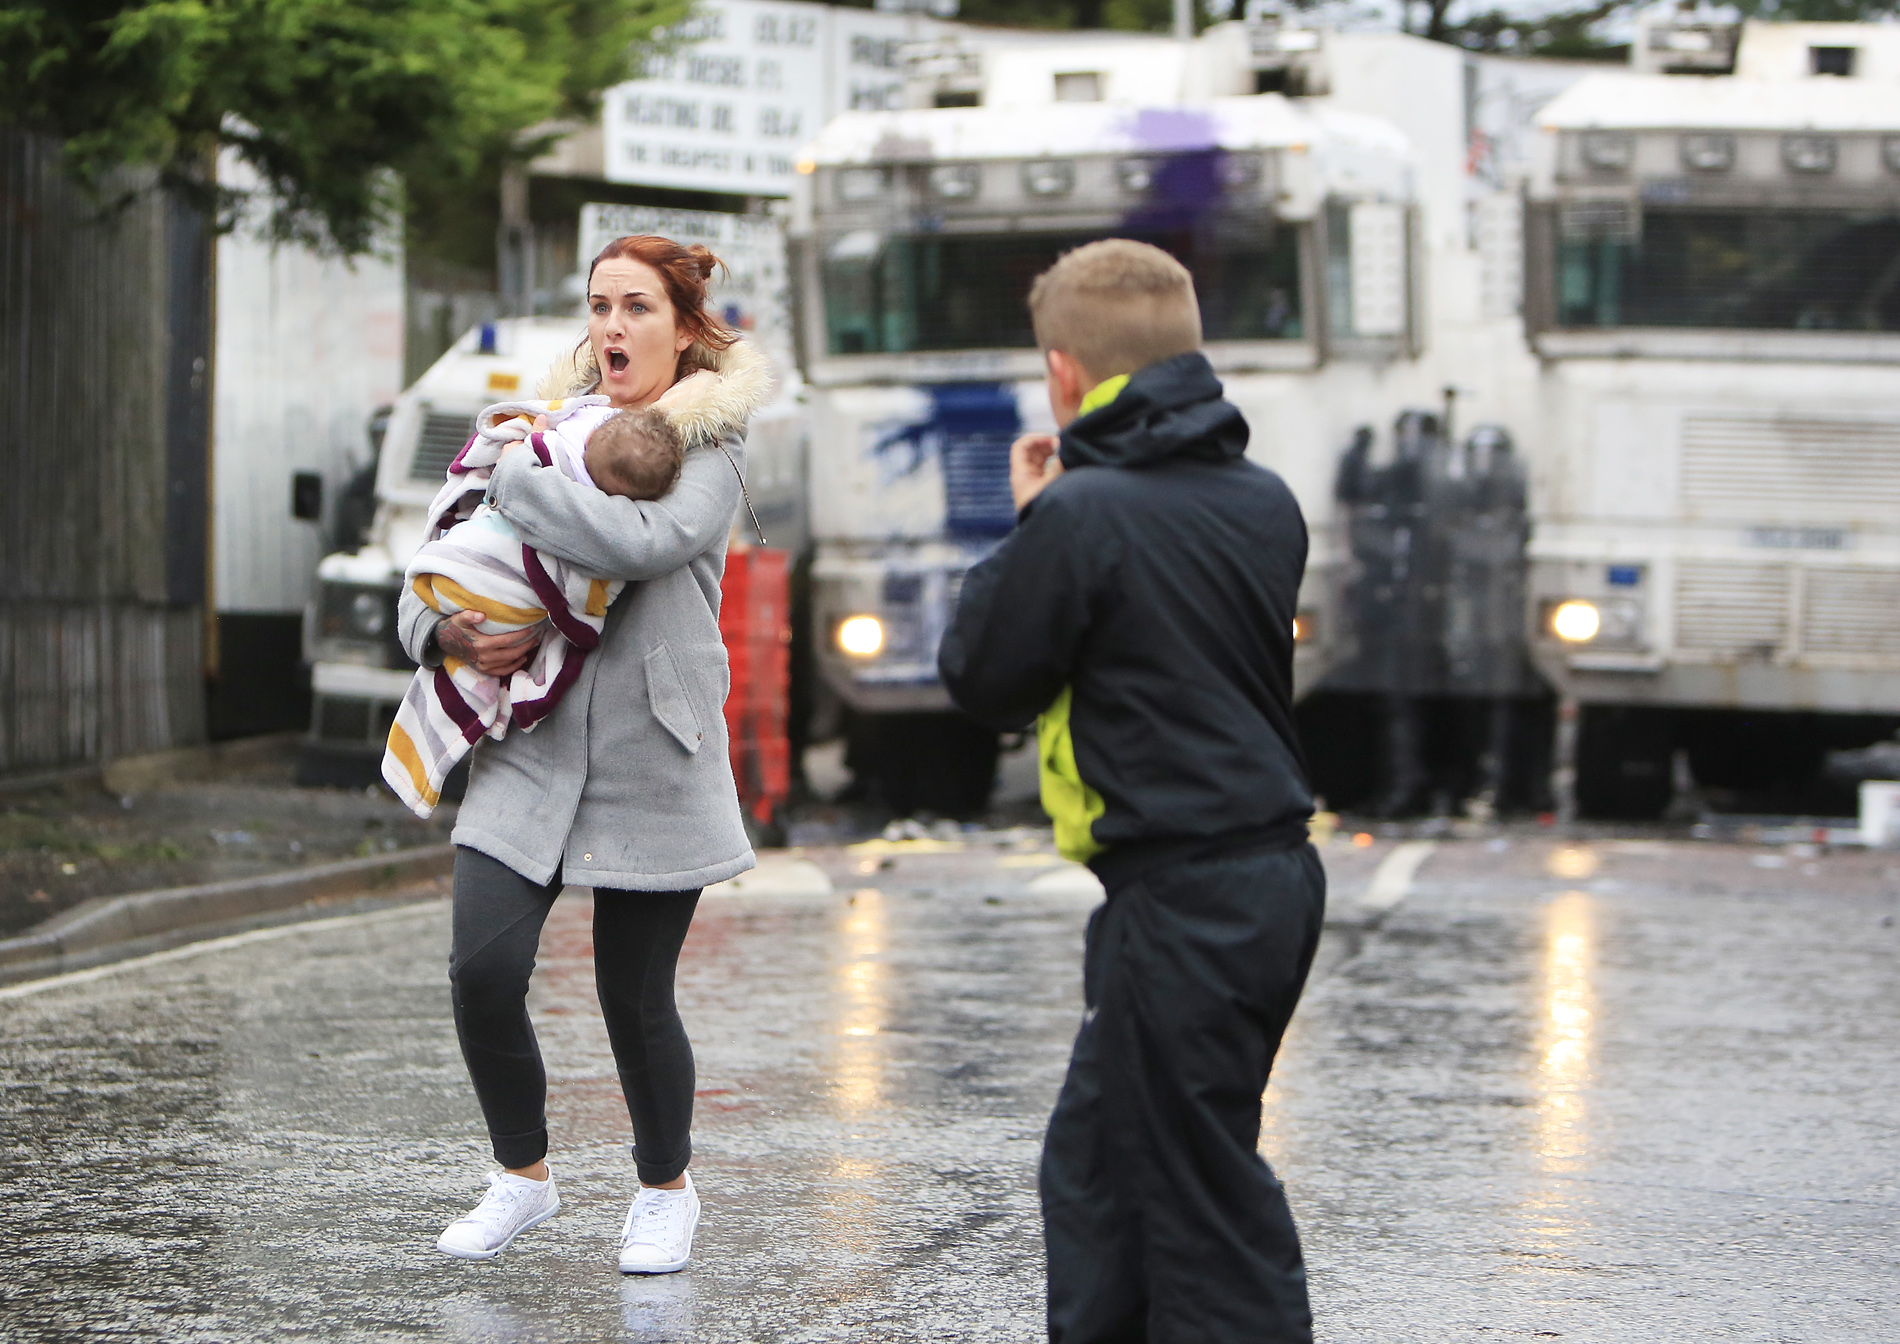 Shauna Bradley brings her friend’s baby to safety after fire broke out at a house near the scene of the rioting 